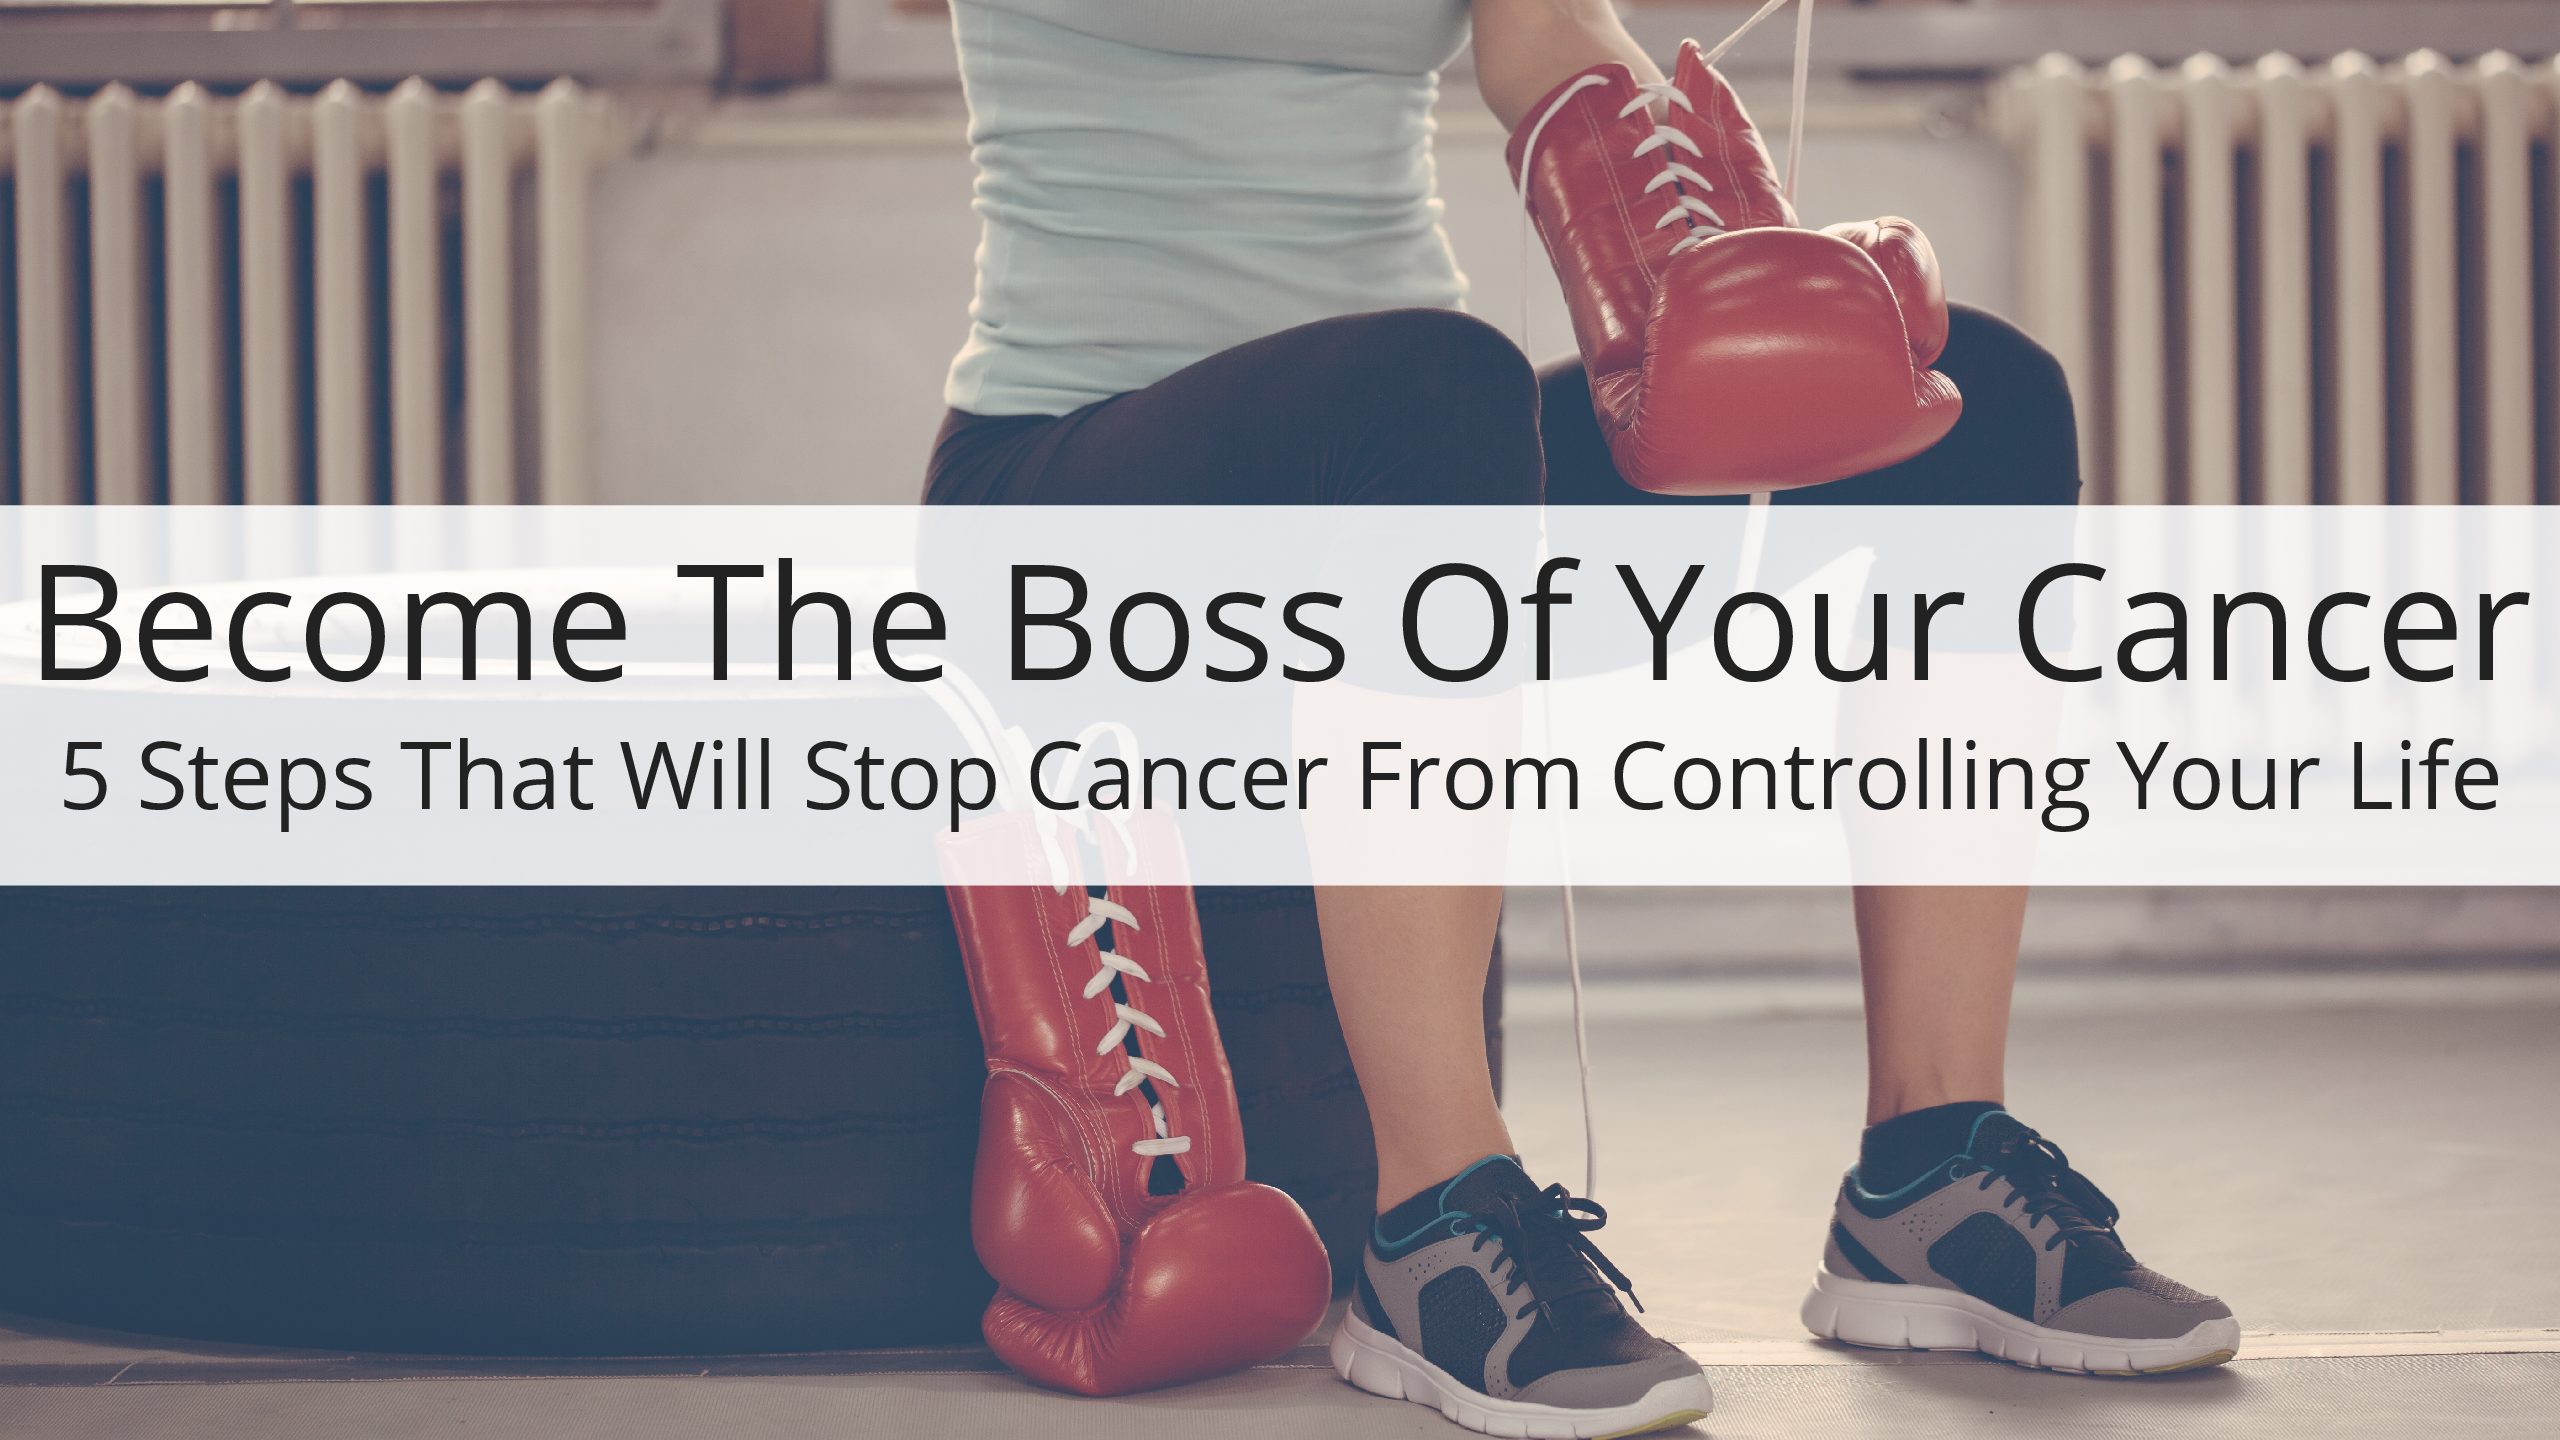 Be the Boss of your Cancer, Cancer Coach